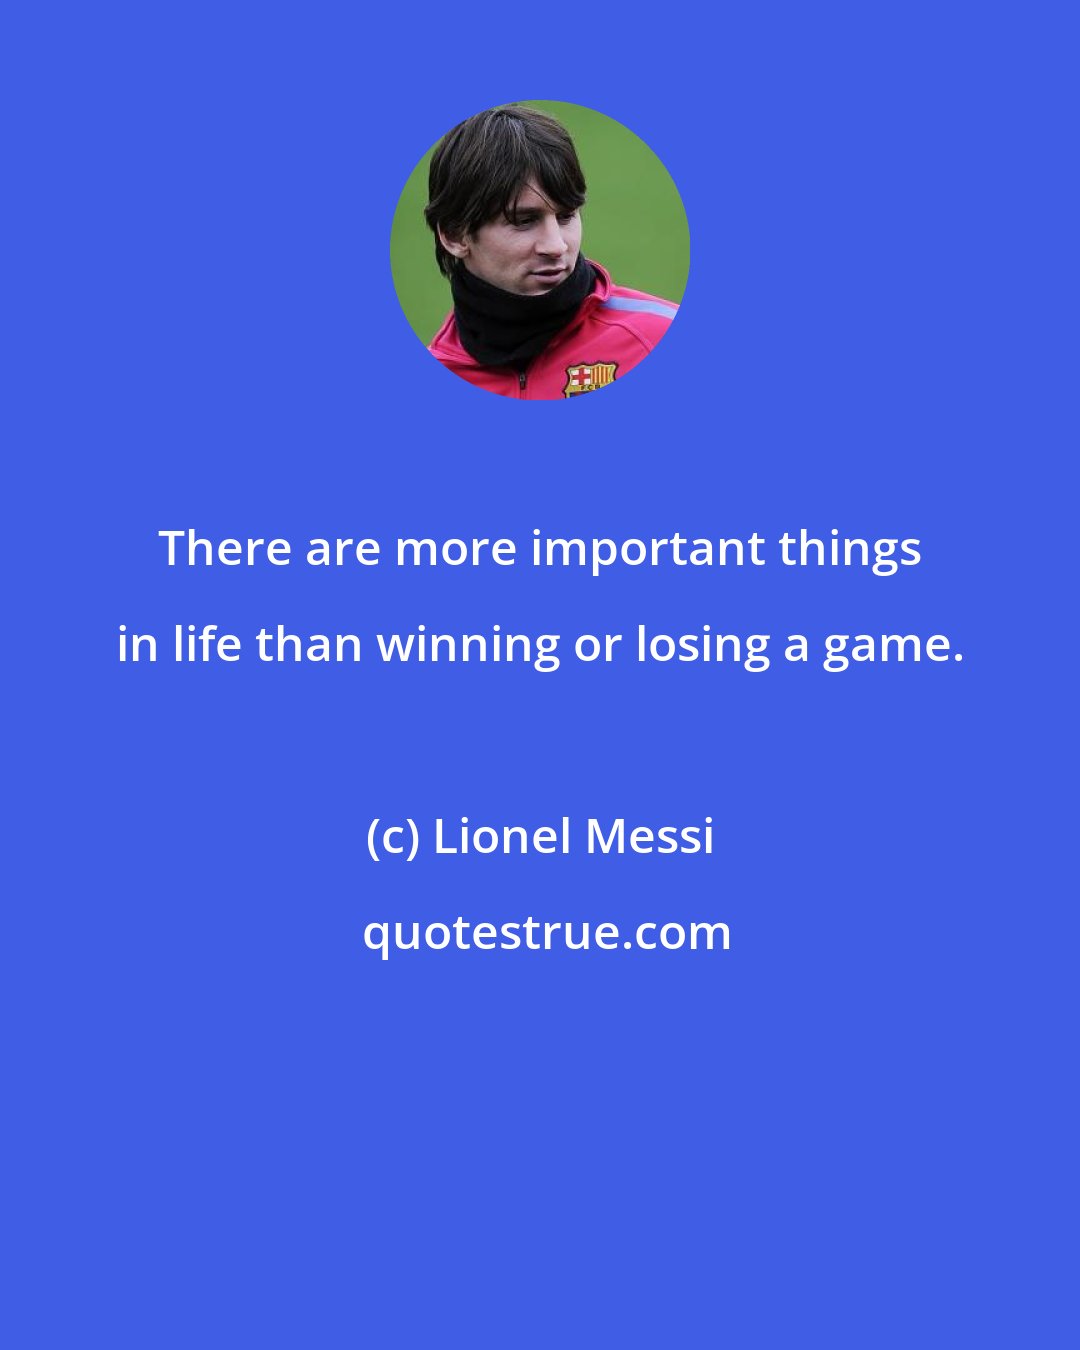 Lionel Messi: There are more important things in life than winning or losing a game.